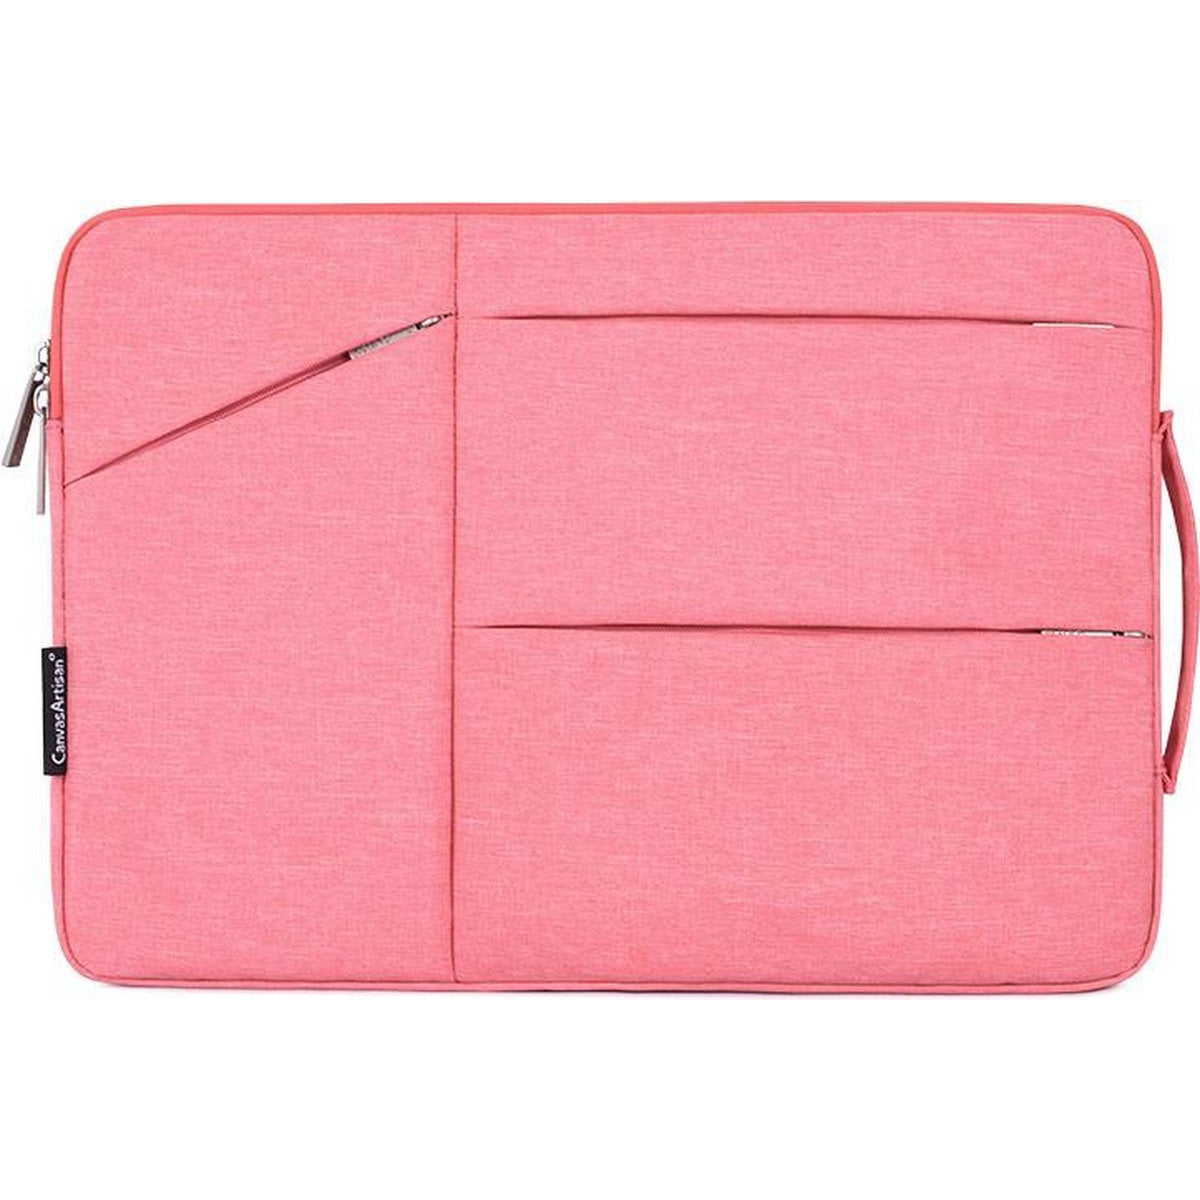 Laptophoes 12 Inch - XV Sleeve - Roze